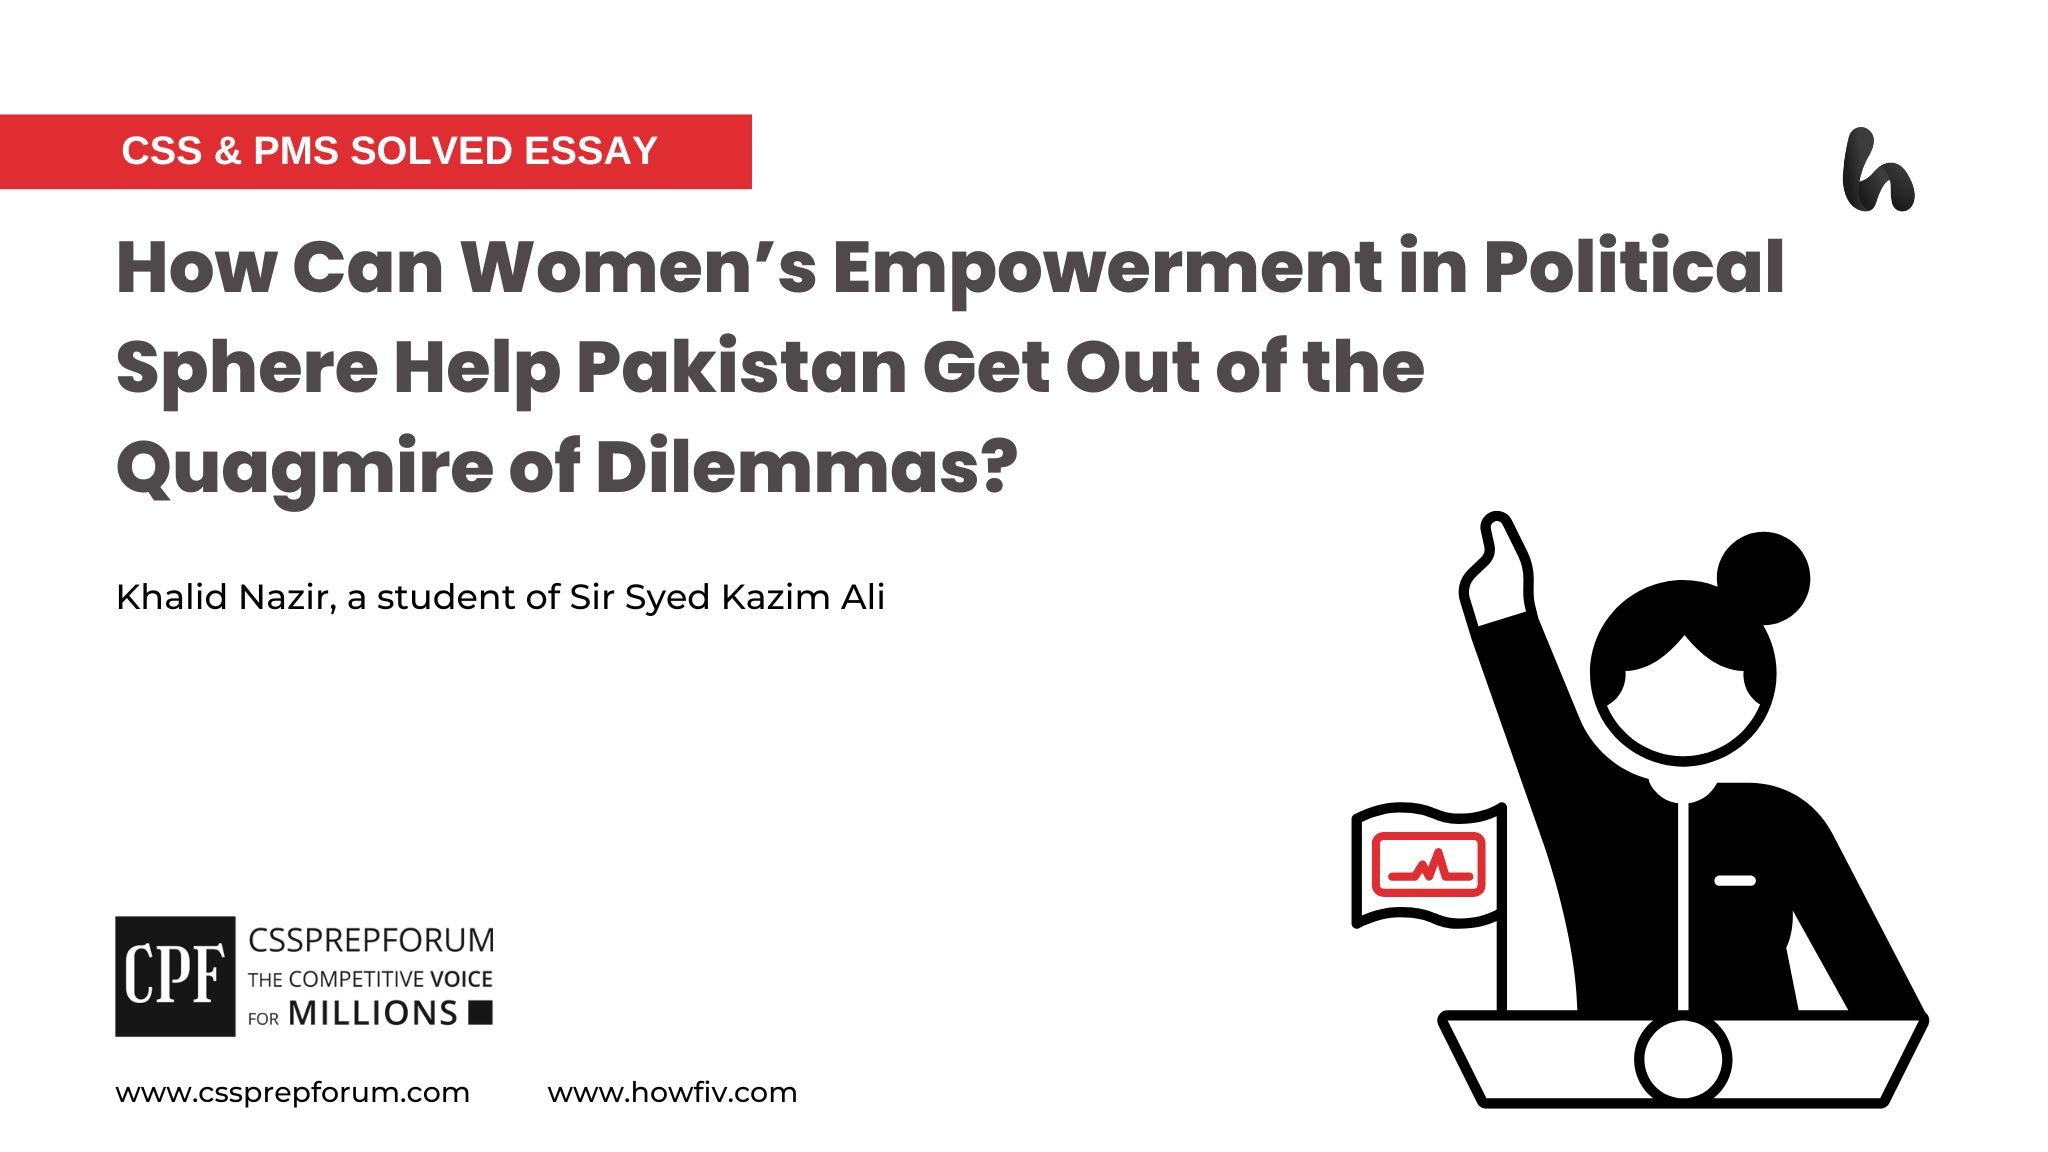 How Can Women’s Empowerment in Political Sphere Help Pakistan Get Out of the Quagmire of Dilemmas? by Khalid Nazir